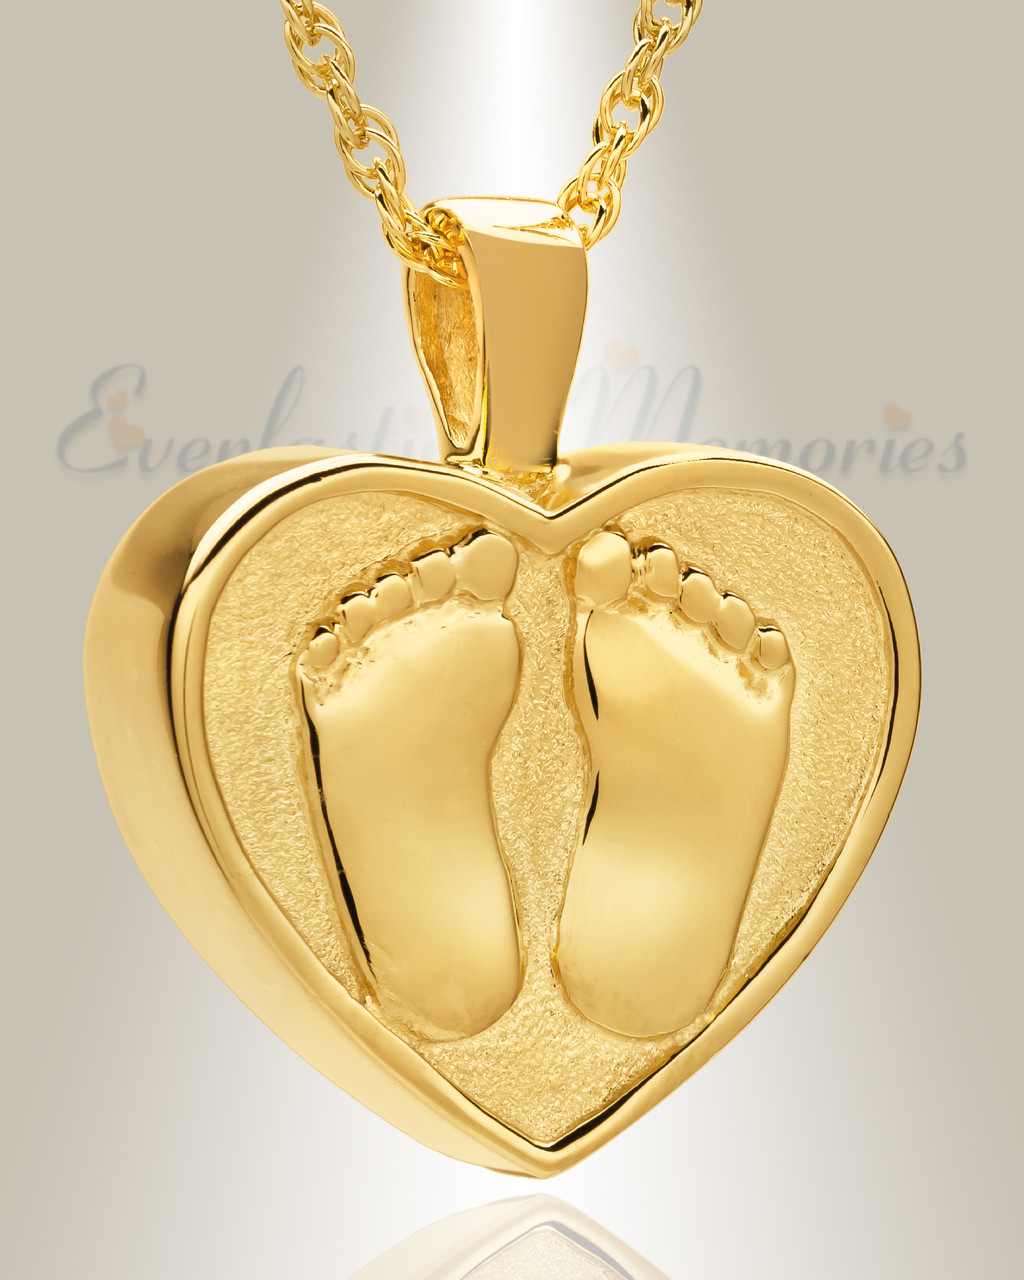 Cremation Memorial Jewelry: Gold Plated Shine Heart